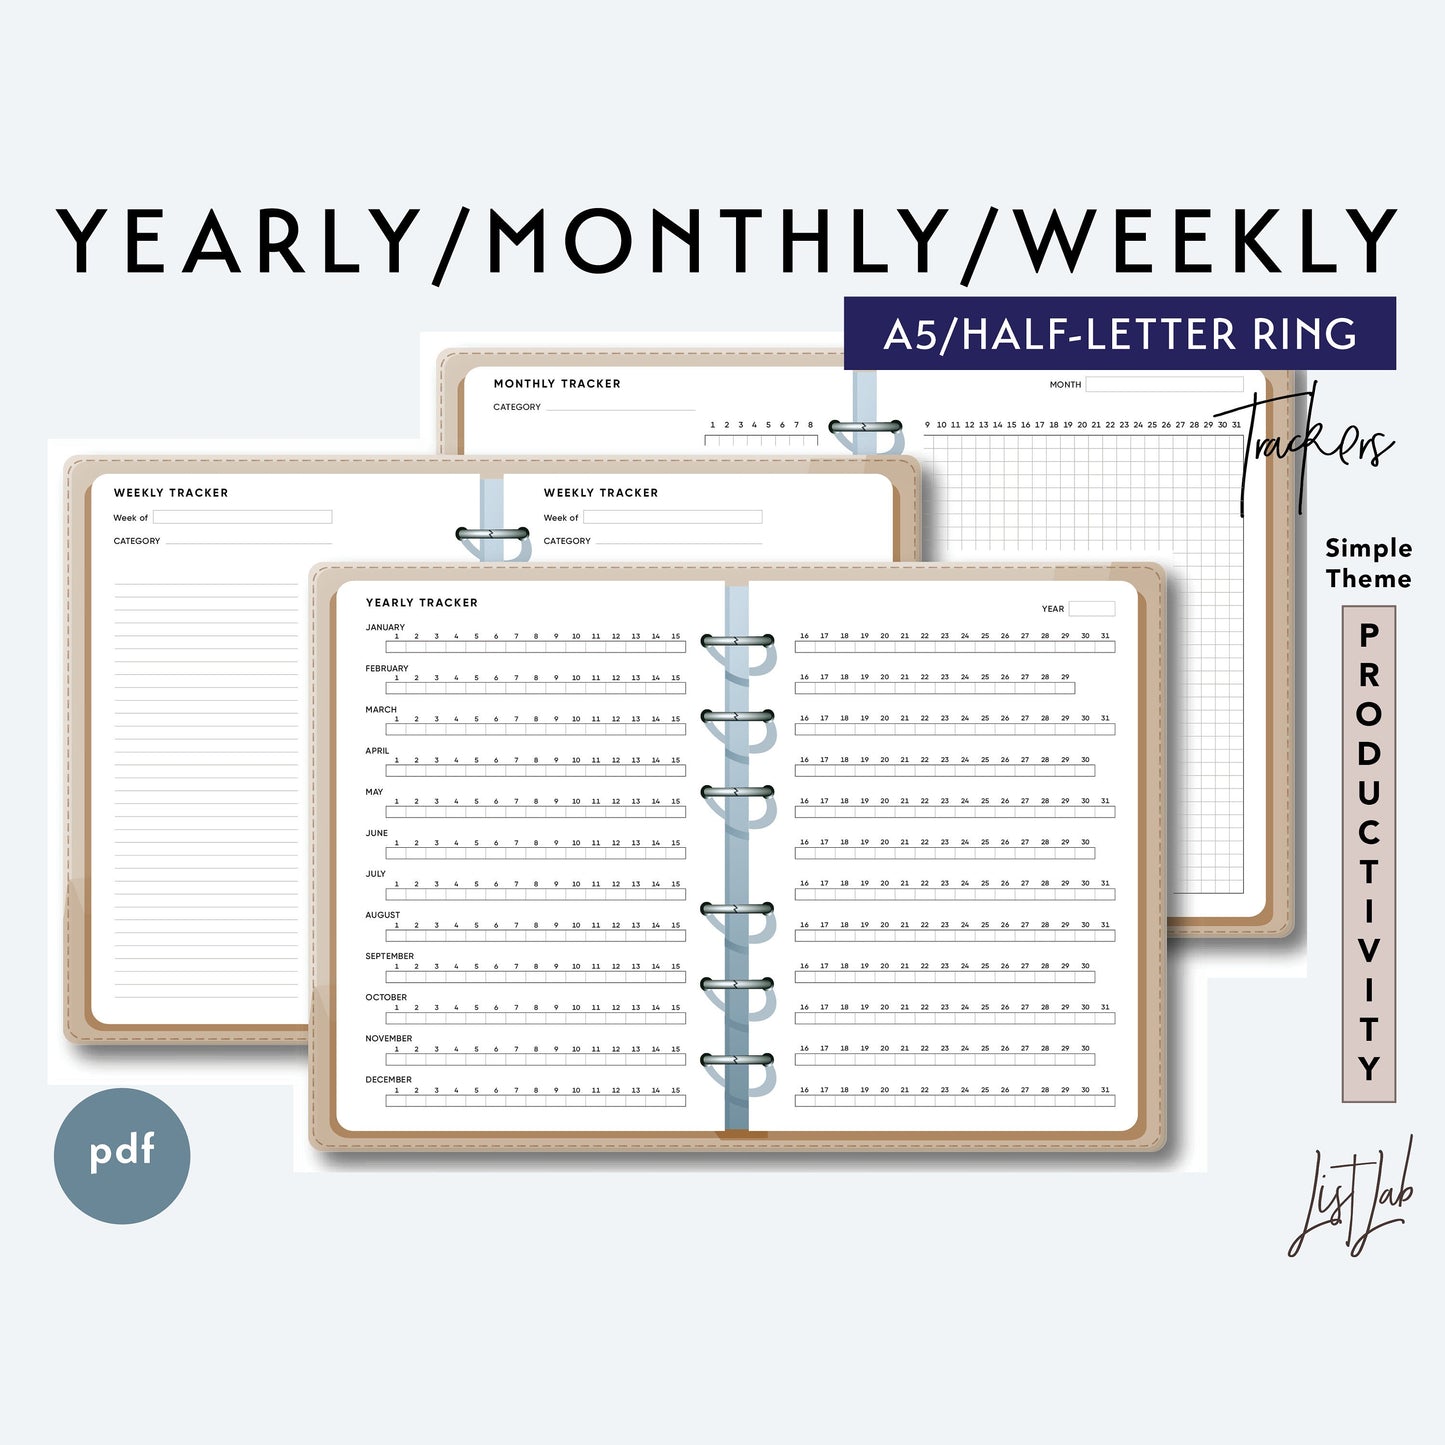 A5 / Half-Letter Ring Yearly Monthly Weekly Trackers Printable Set